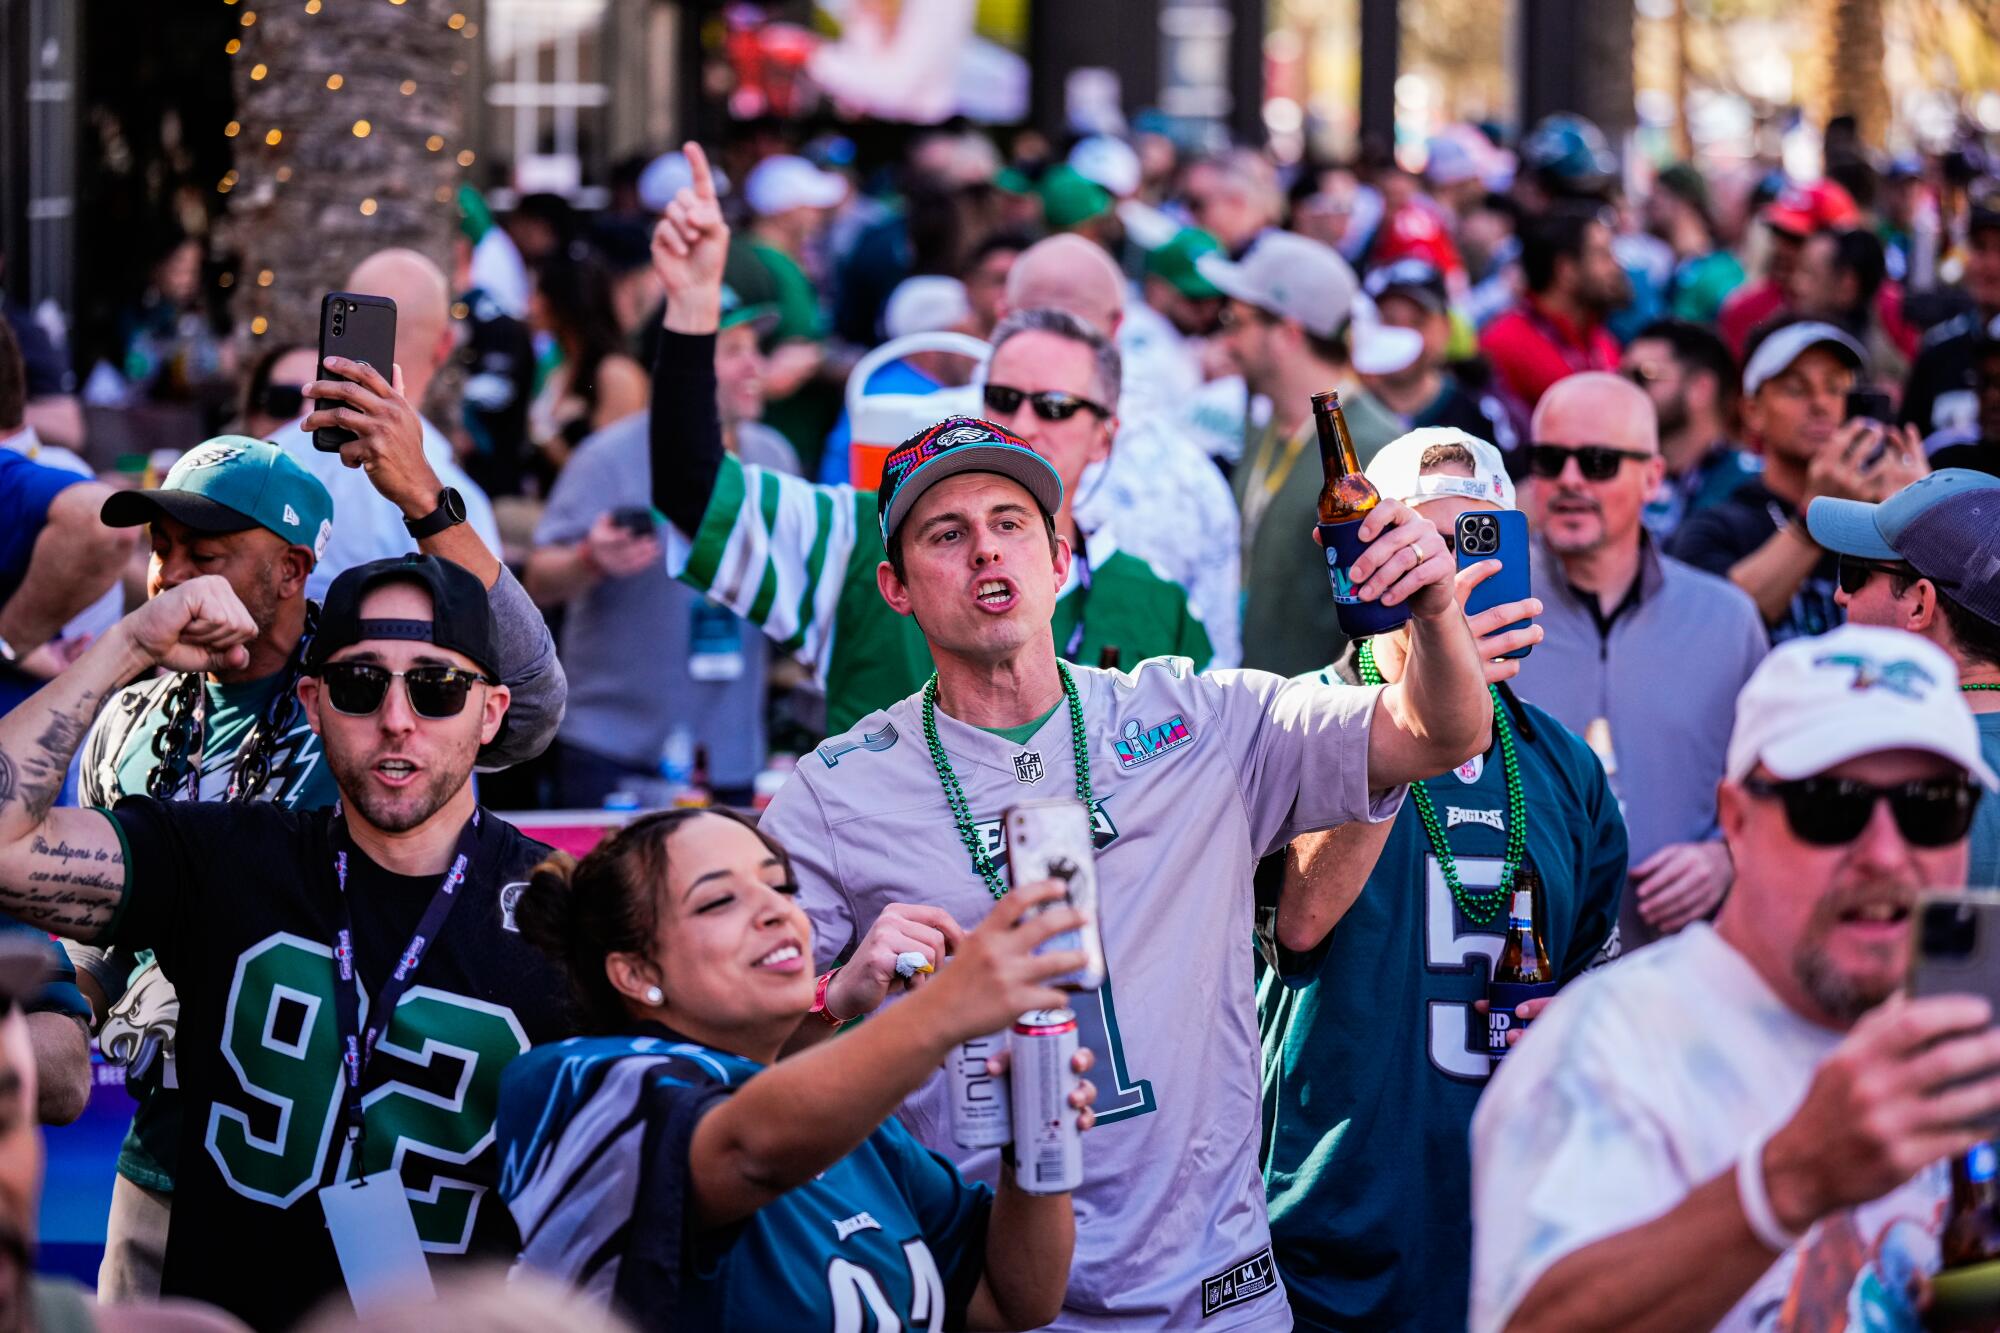 Eagles-49ers: Sights and sounds from a raucous scene in Philadelphia